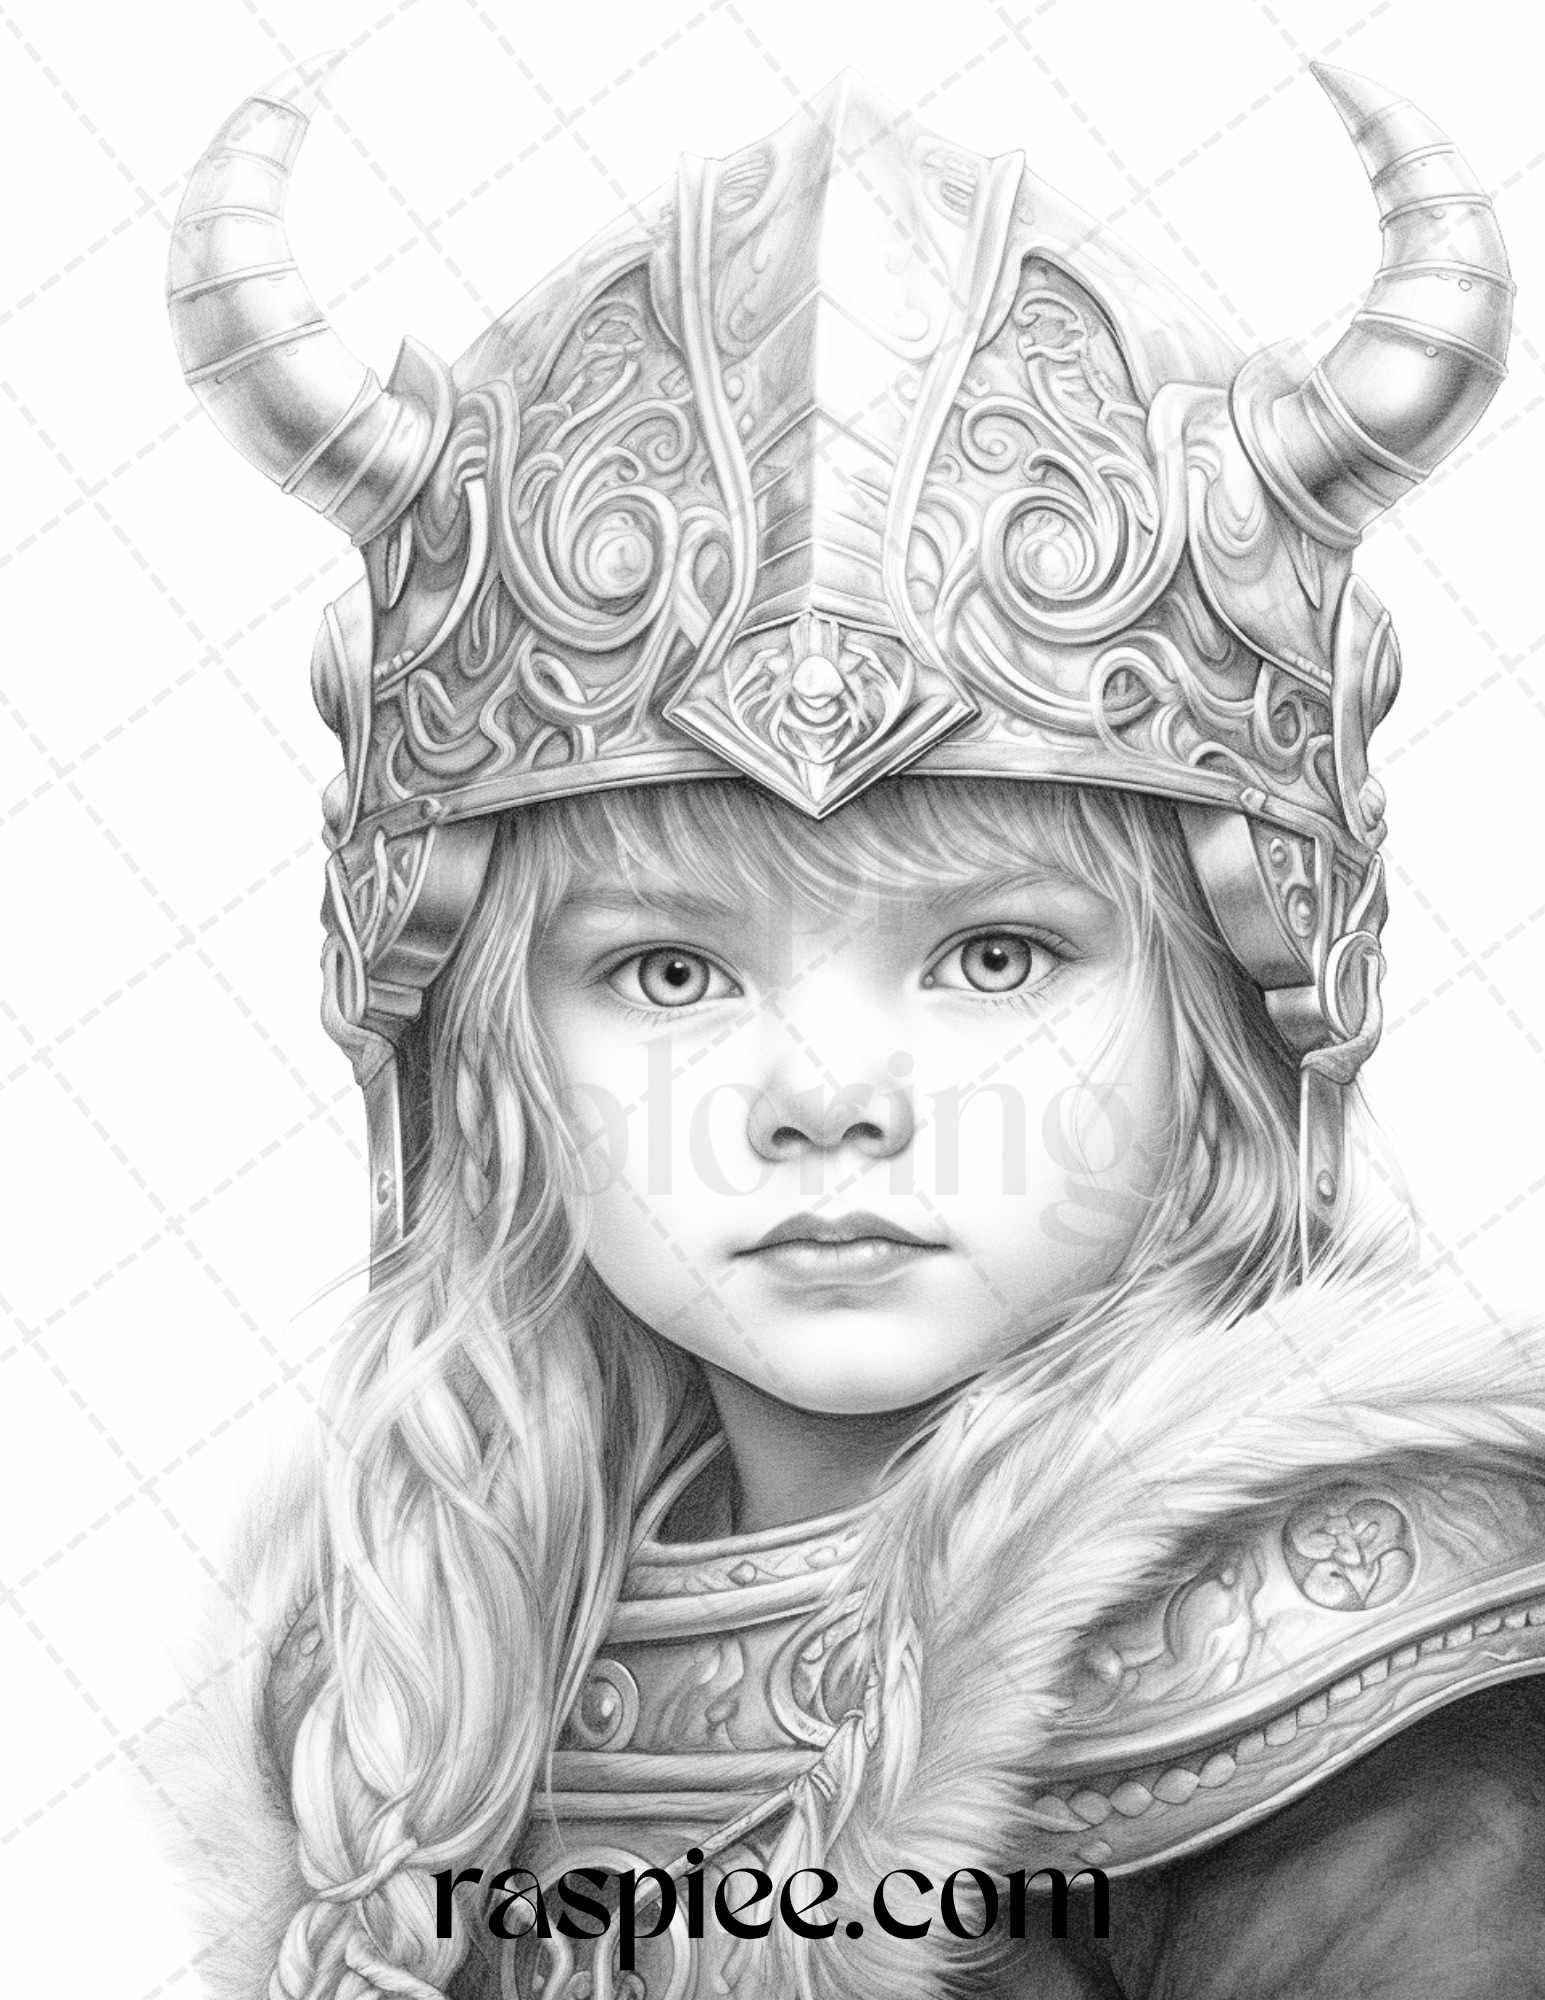 Printable Little Viking Grayscale Coloring Page, DIY Boys and Girls Portrait Coloring Sheet, Nordic Theme Kids Coloring Activity, Instant Download Viking Coloring Page, Fun Grayscale Coloring Printable